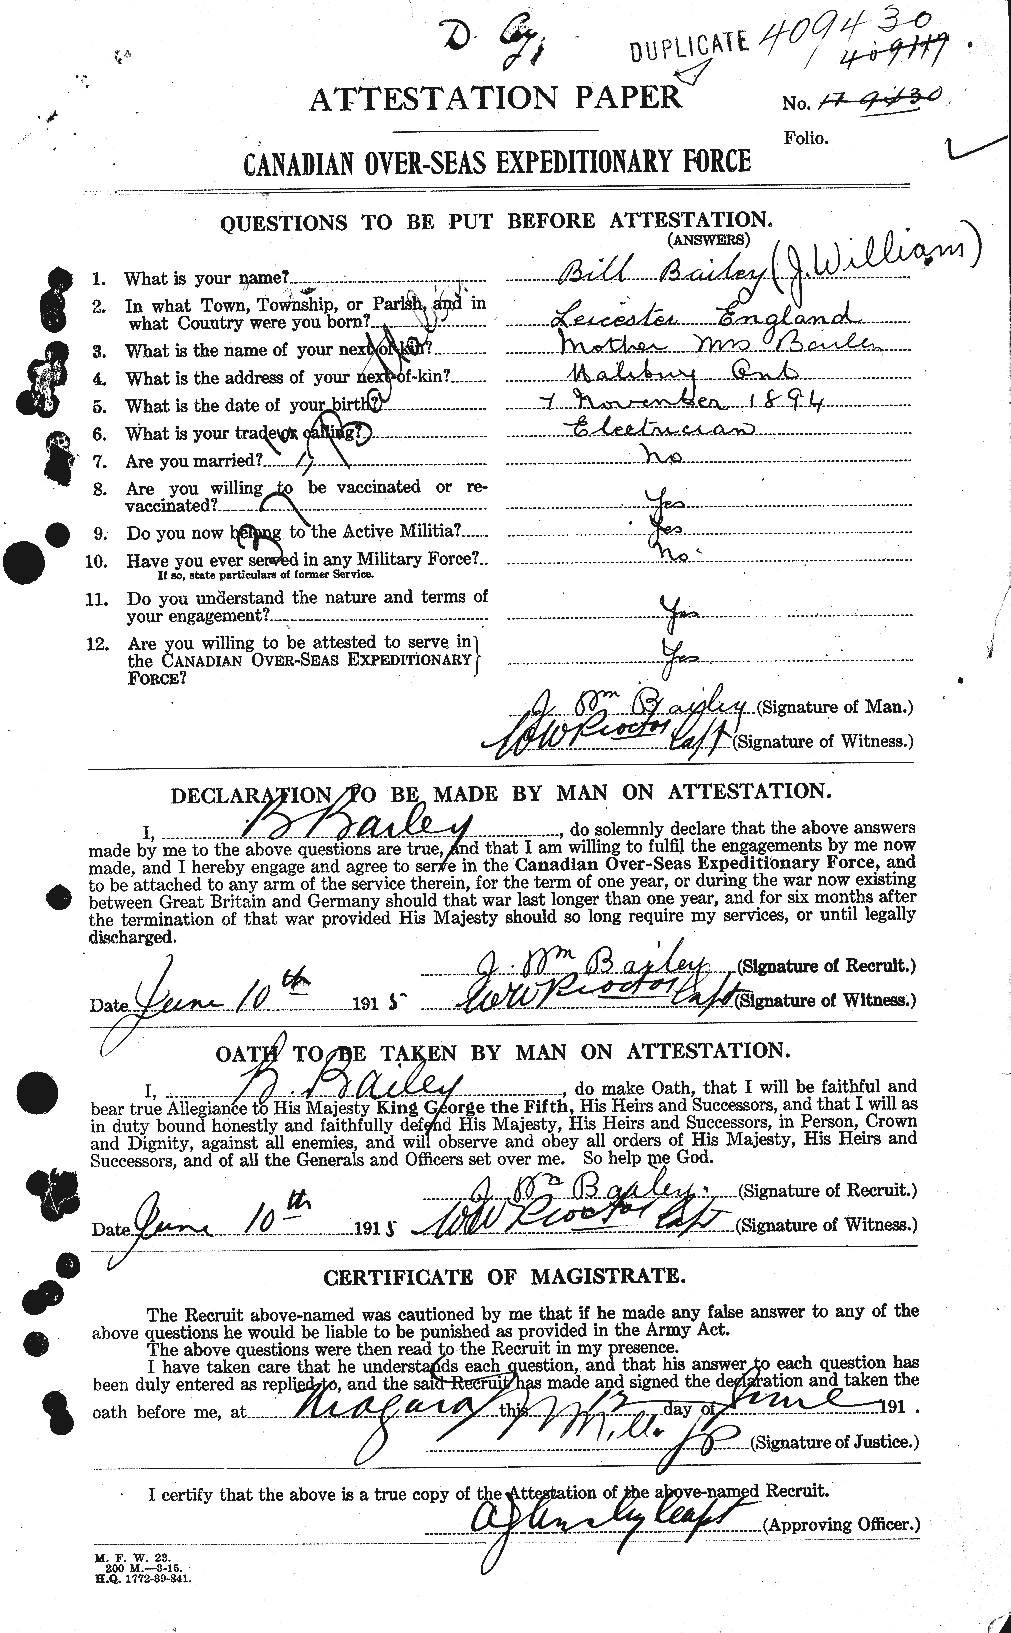 Personnel Records of the First World War - CEF 218877a